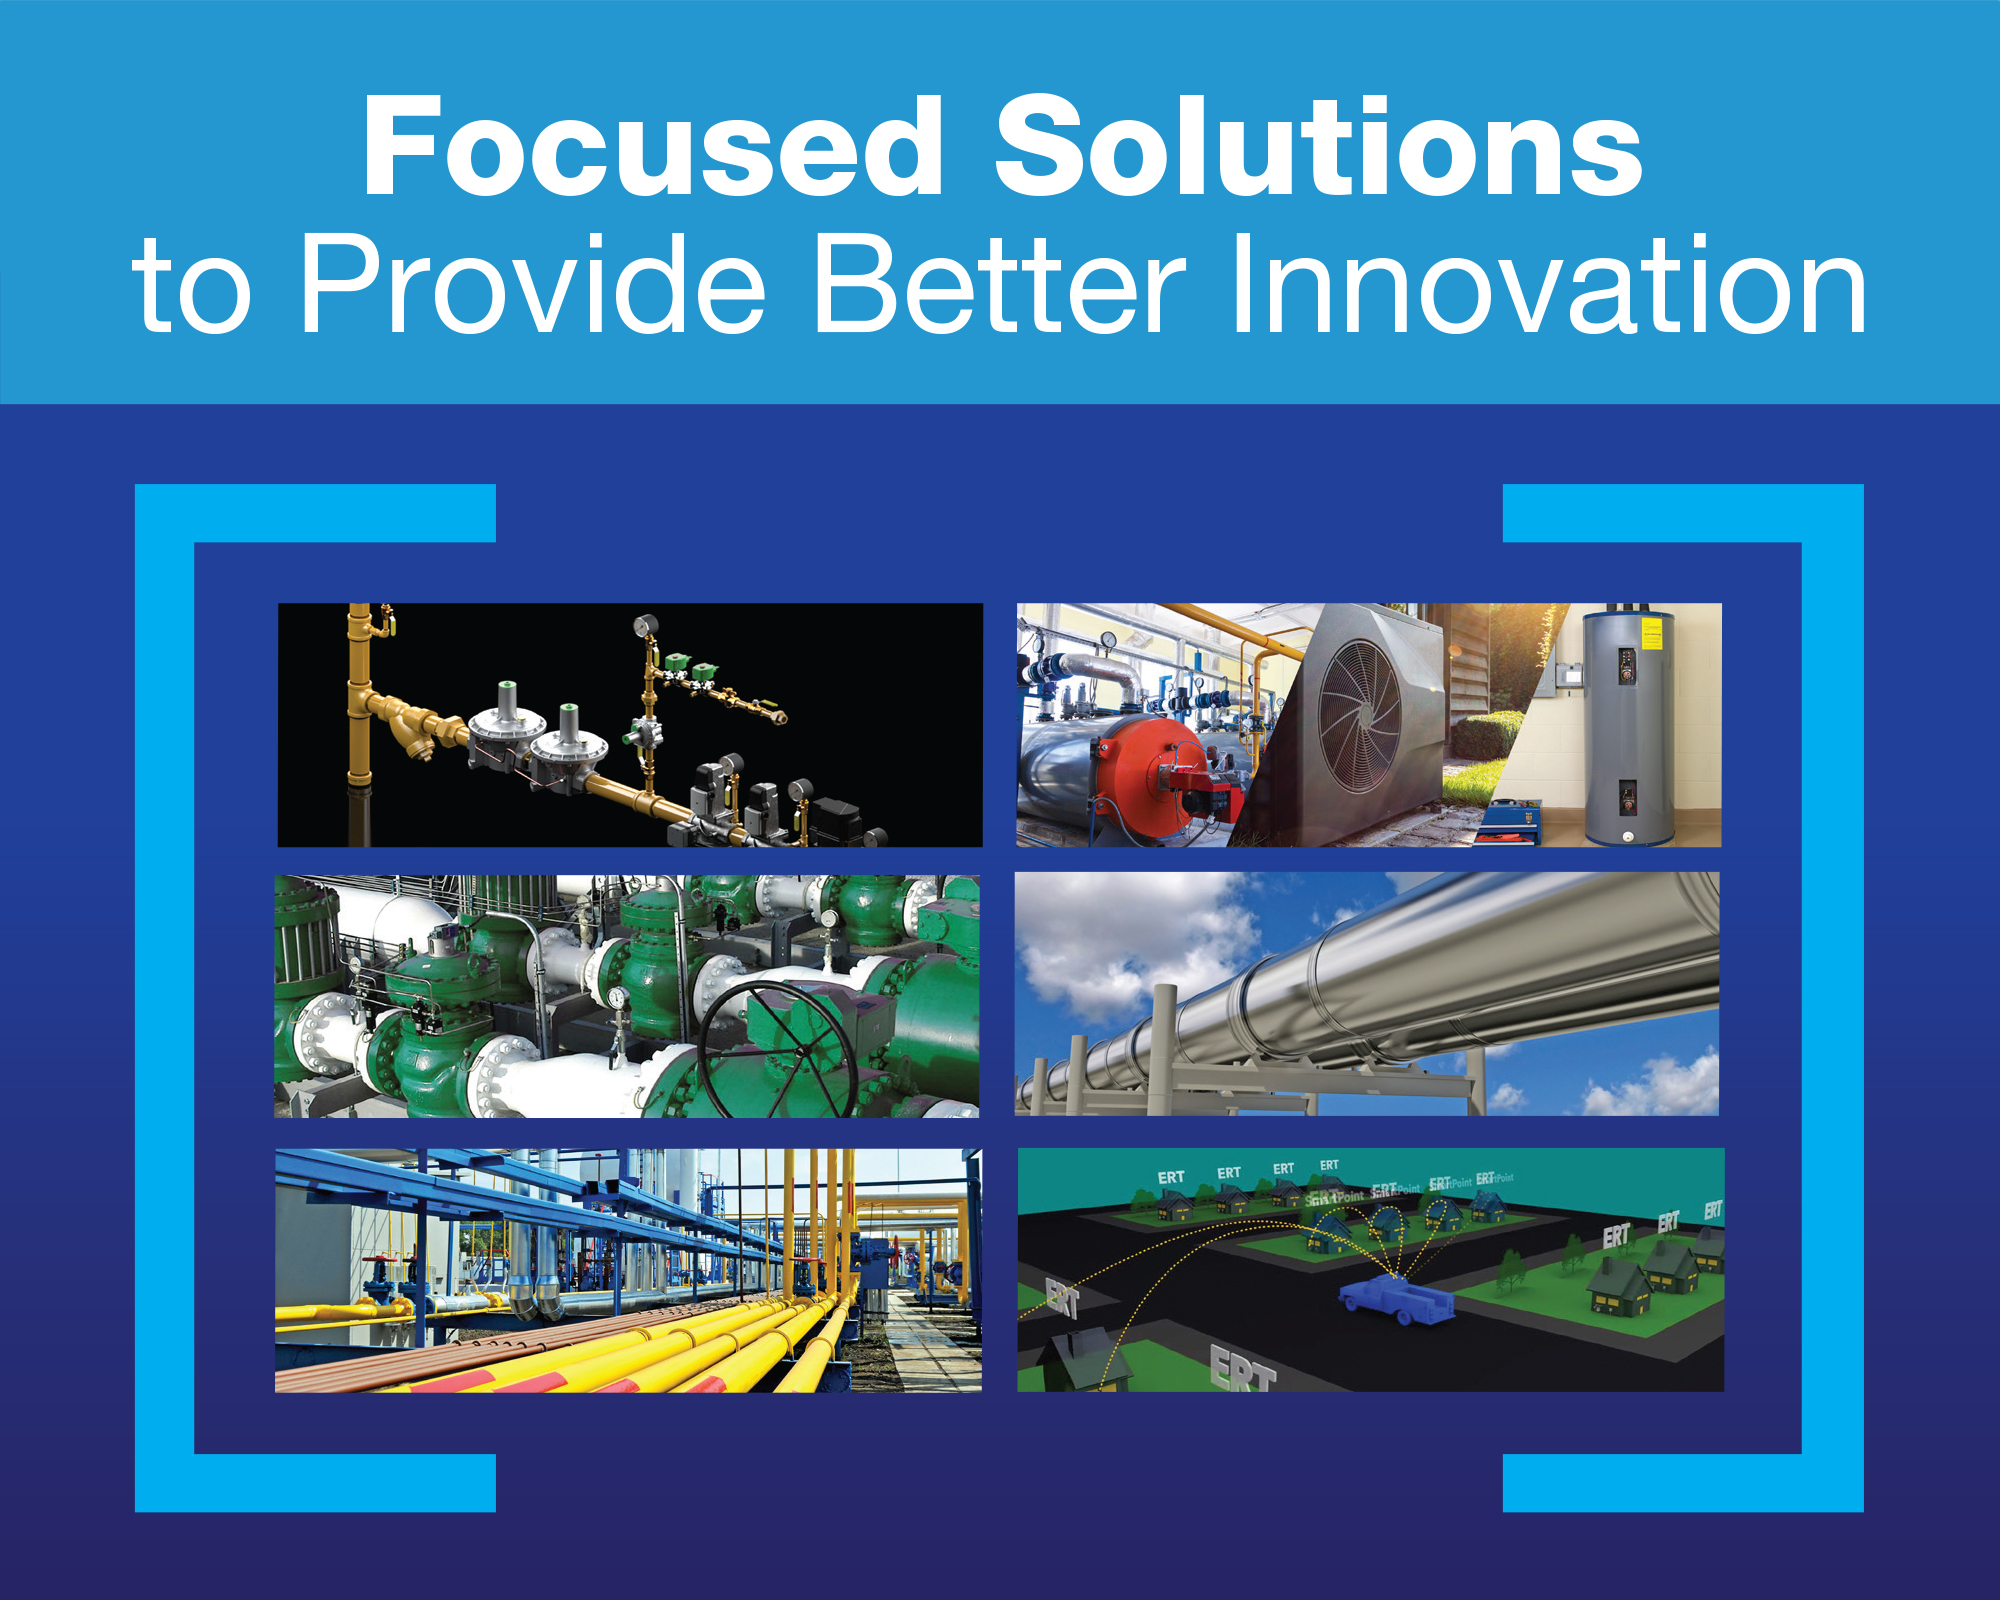 Focused Solutions to Provide Better Innovation